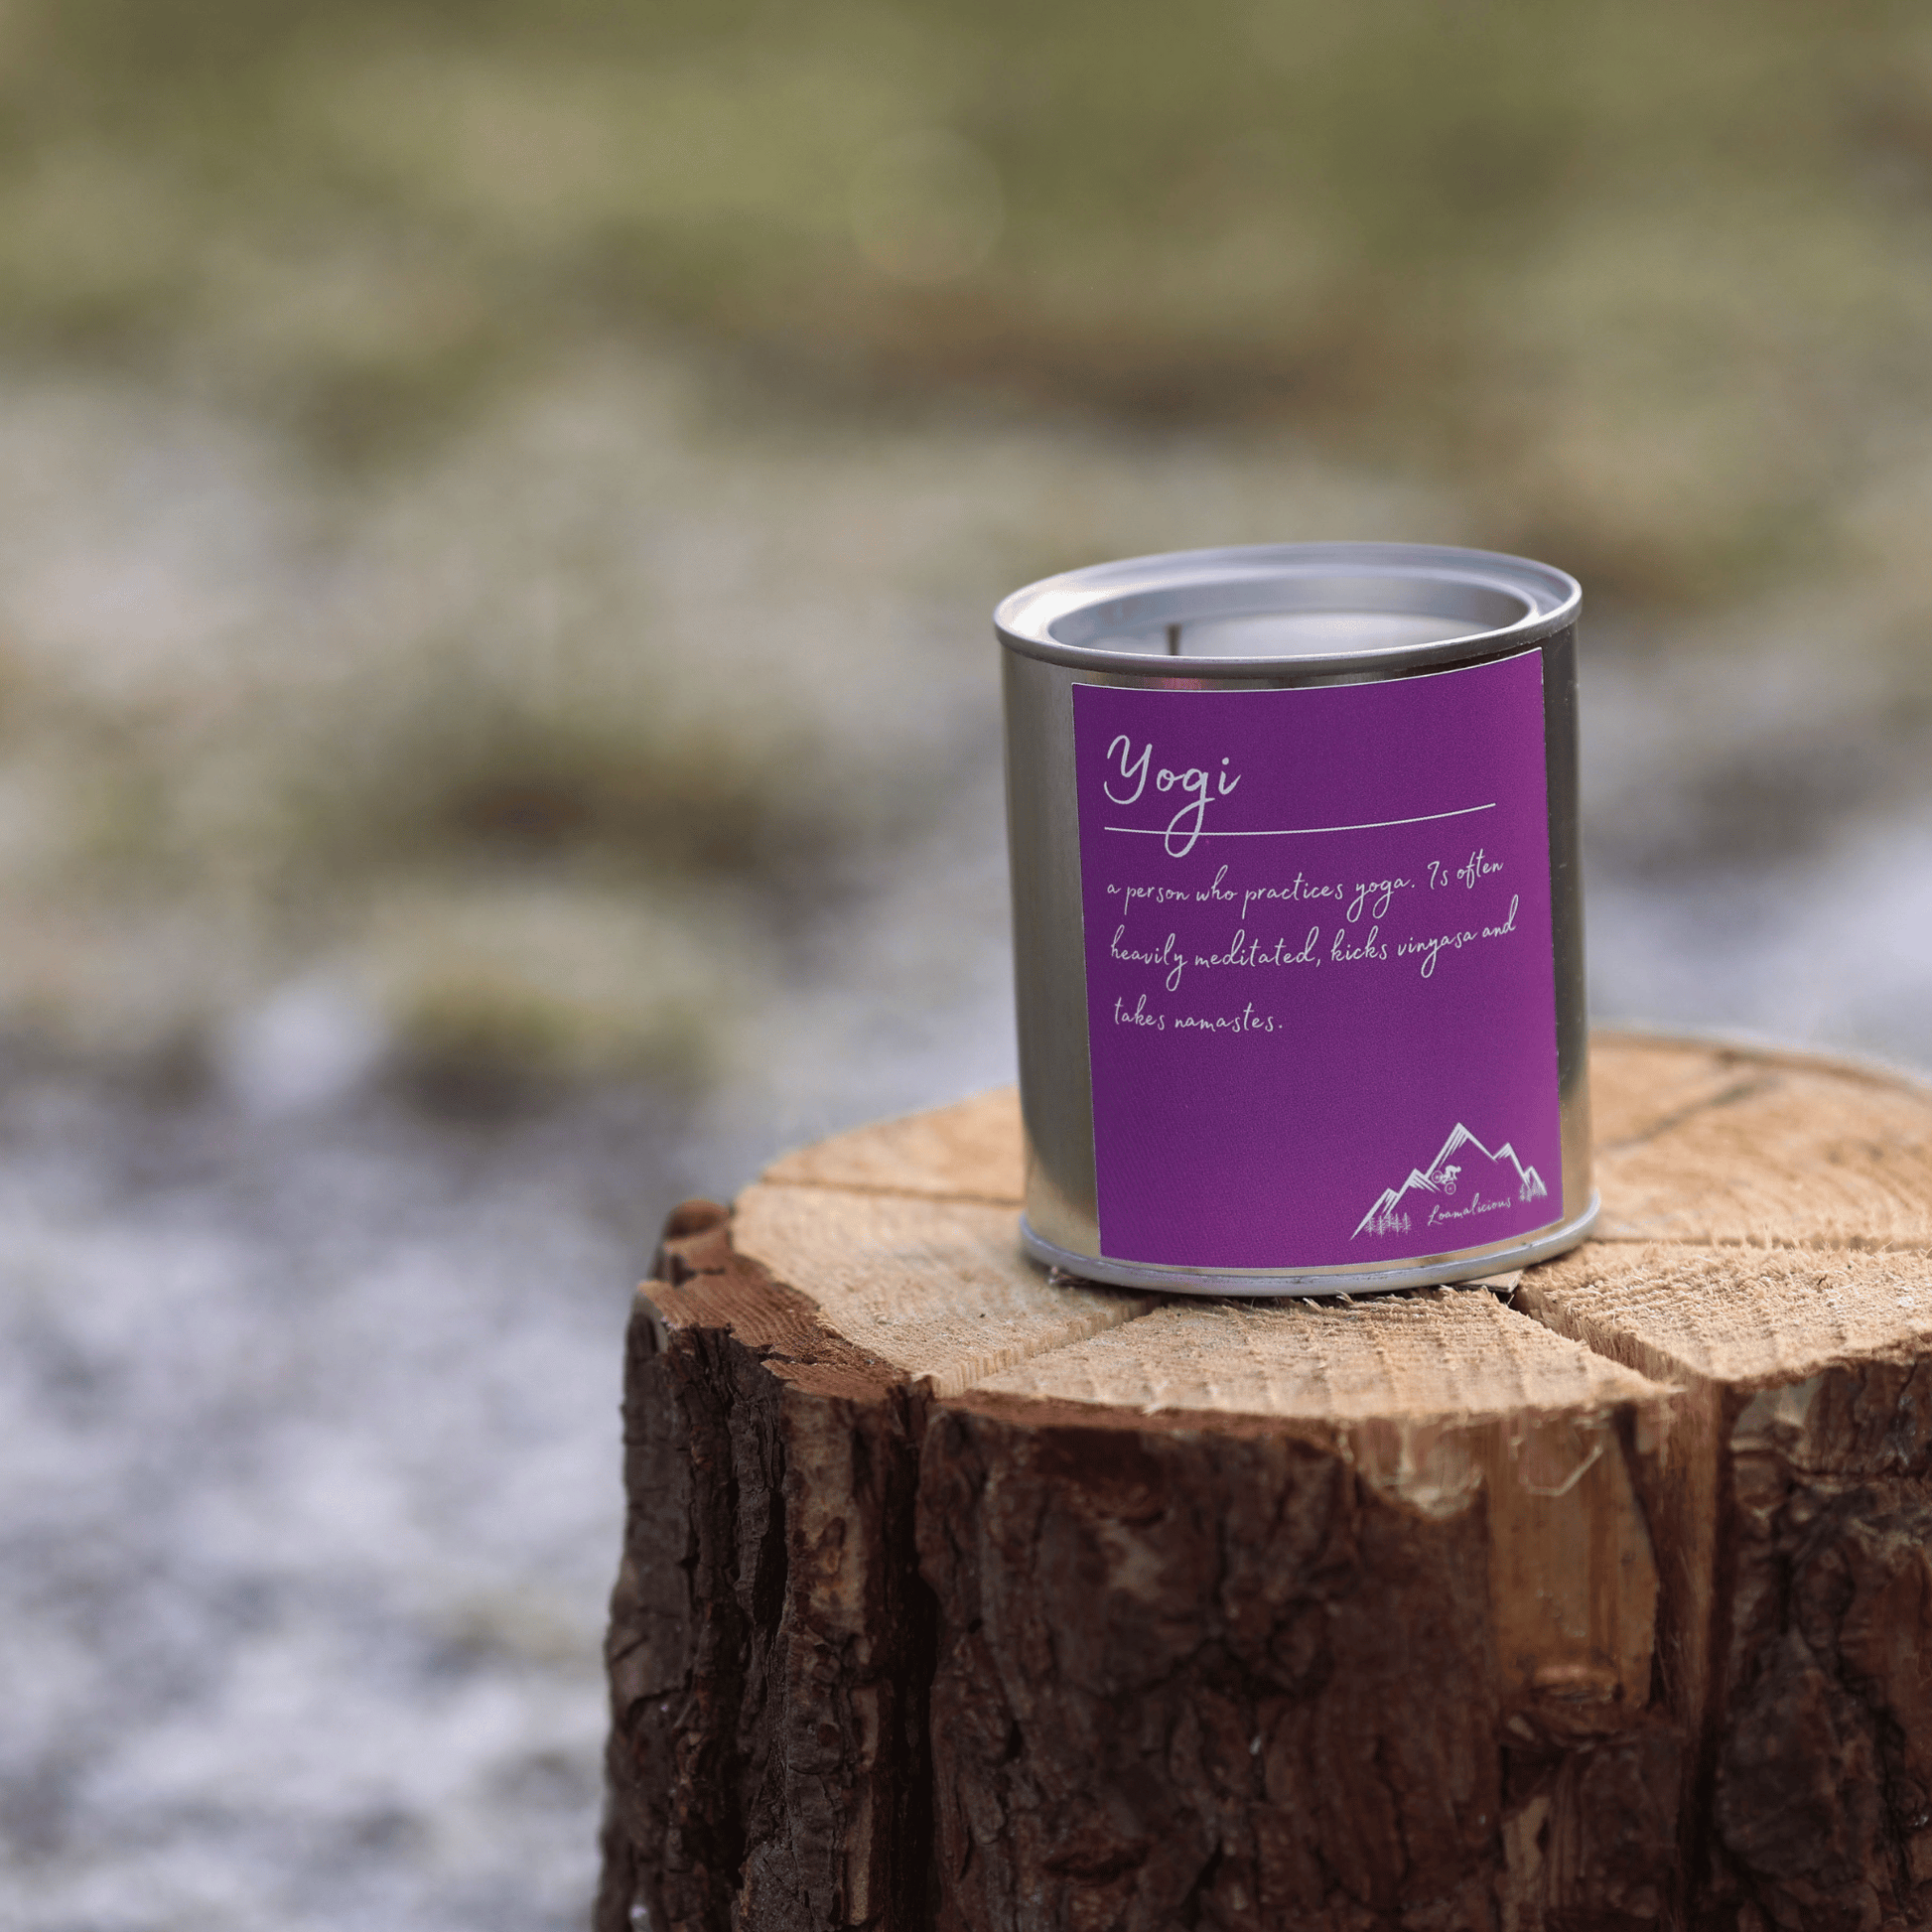 Yoga candle | scented candle | handmade forest of dean | gloucestershire adventure | small batch candle